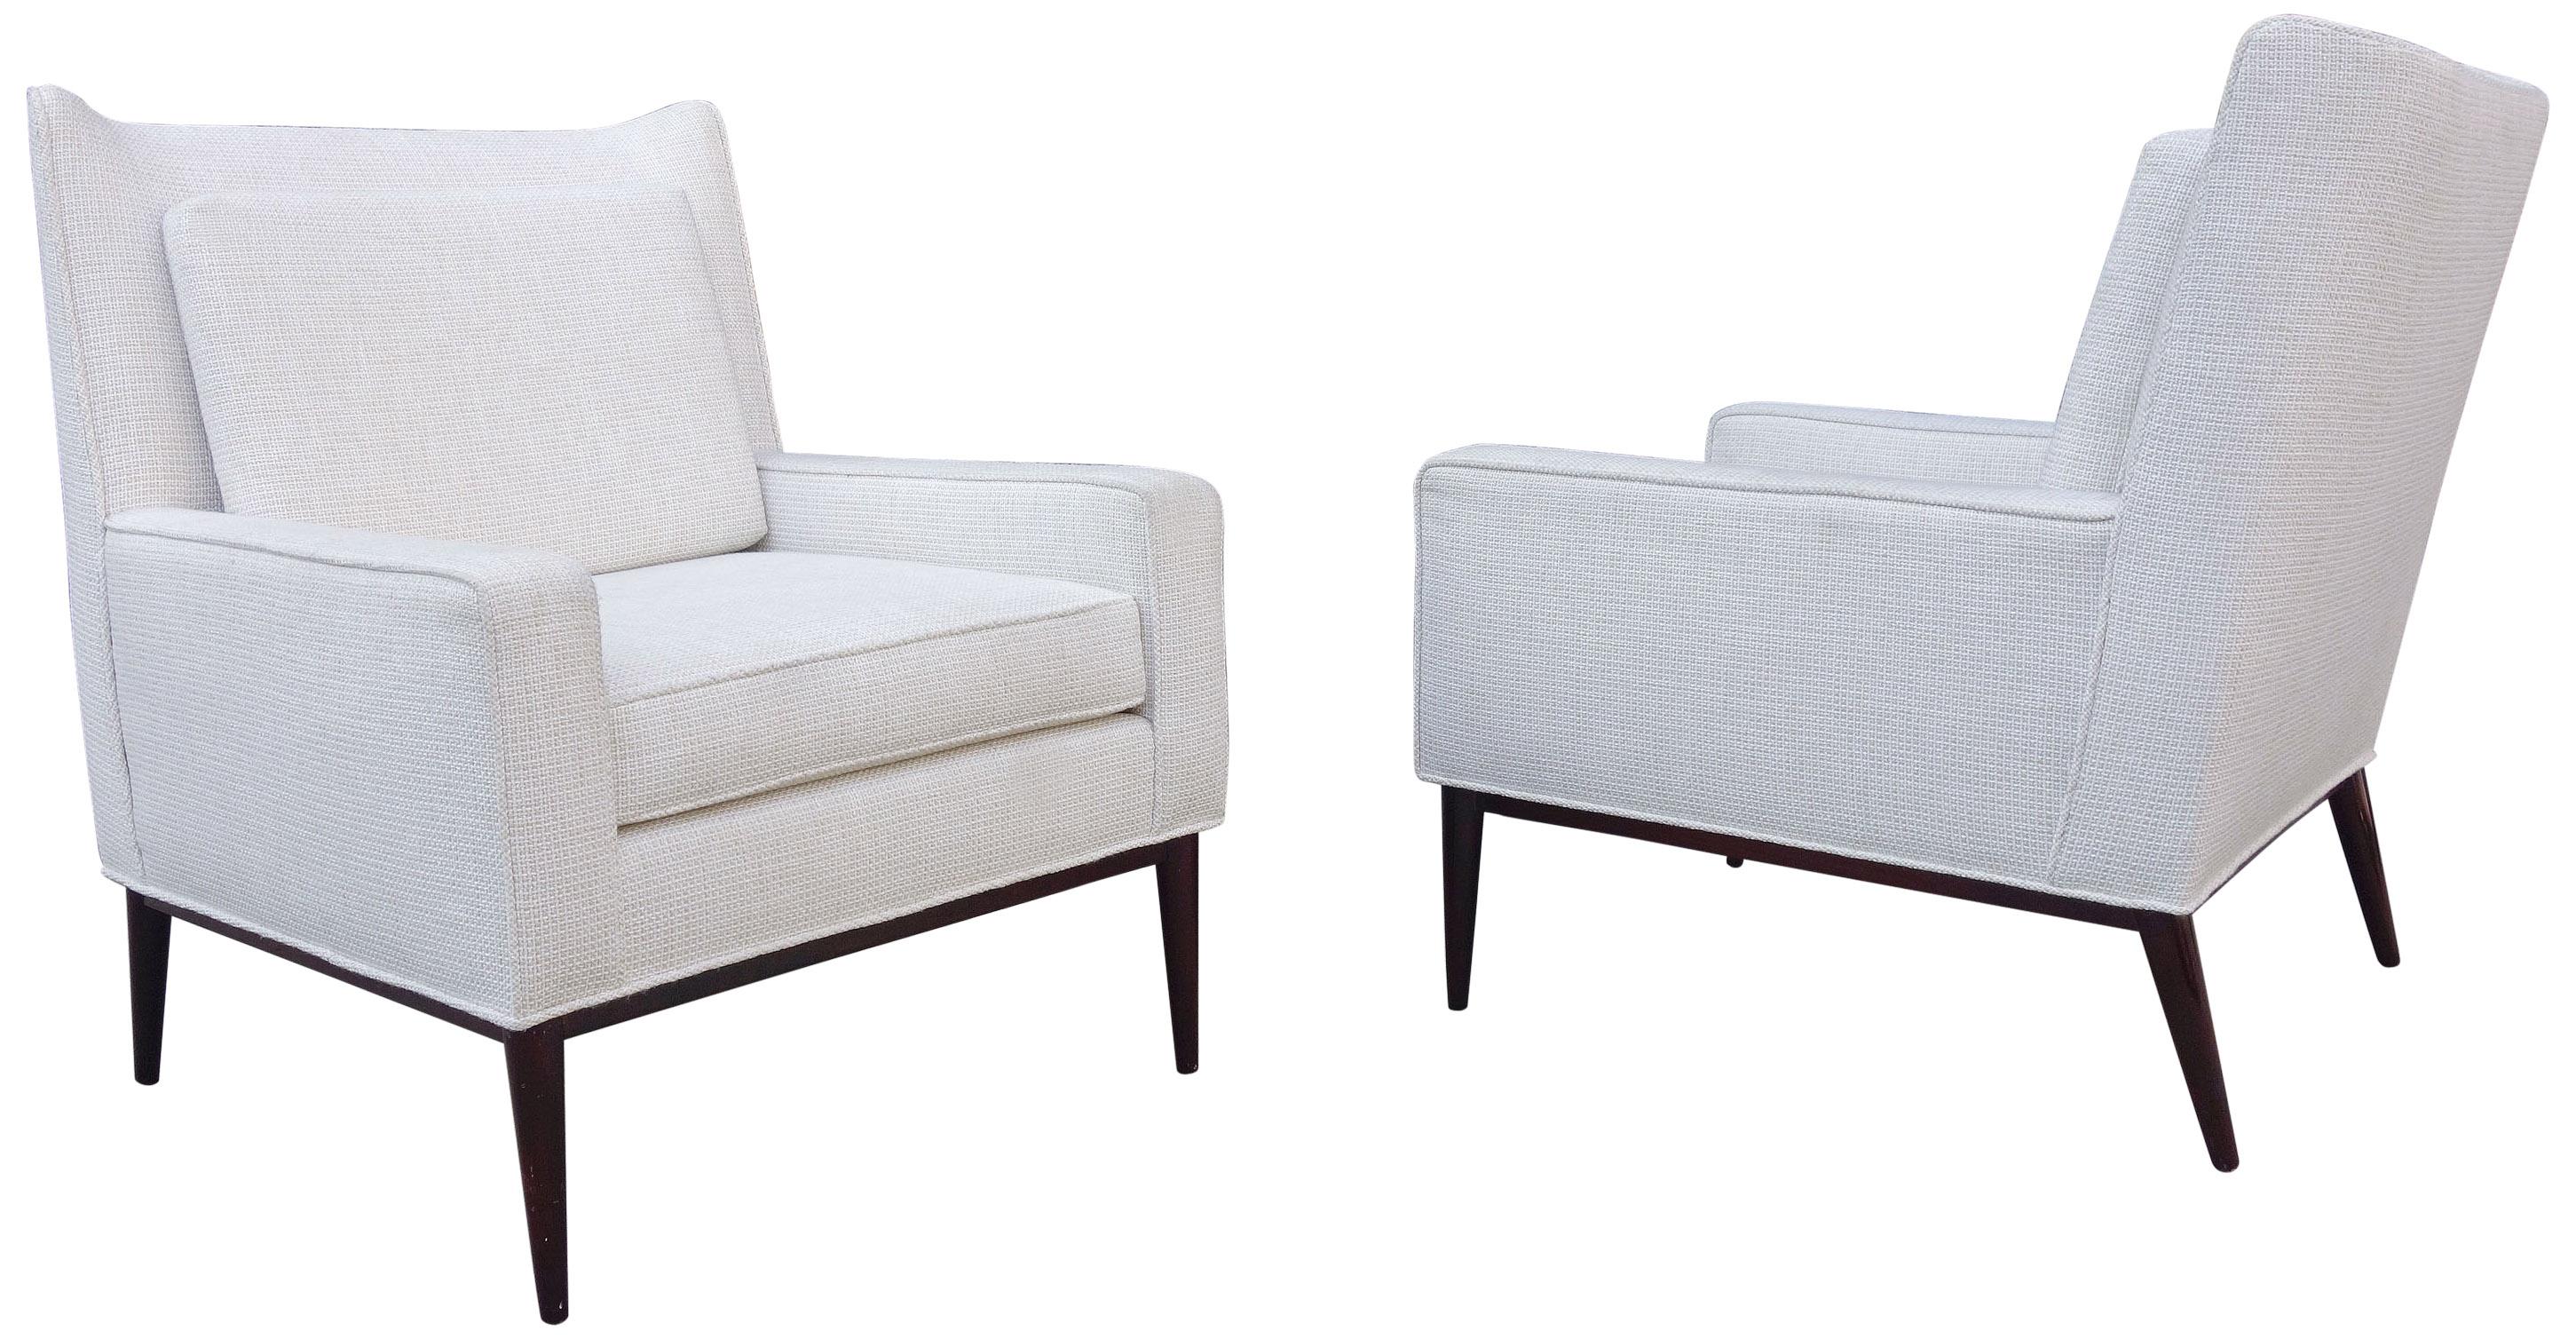 Midcentury Paul McCobb Lounge Chairs for Directional 1